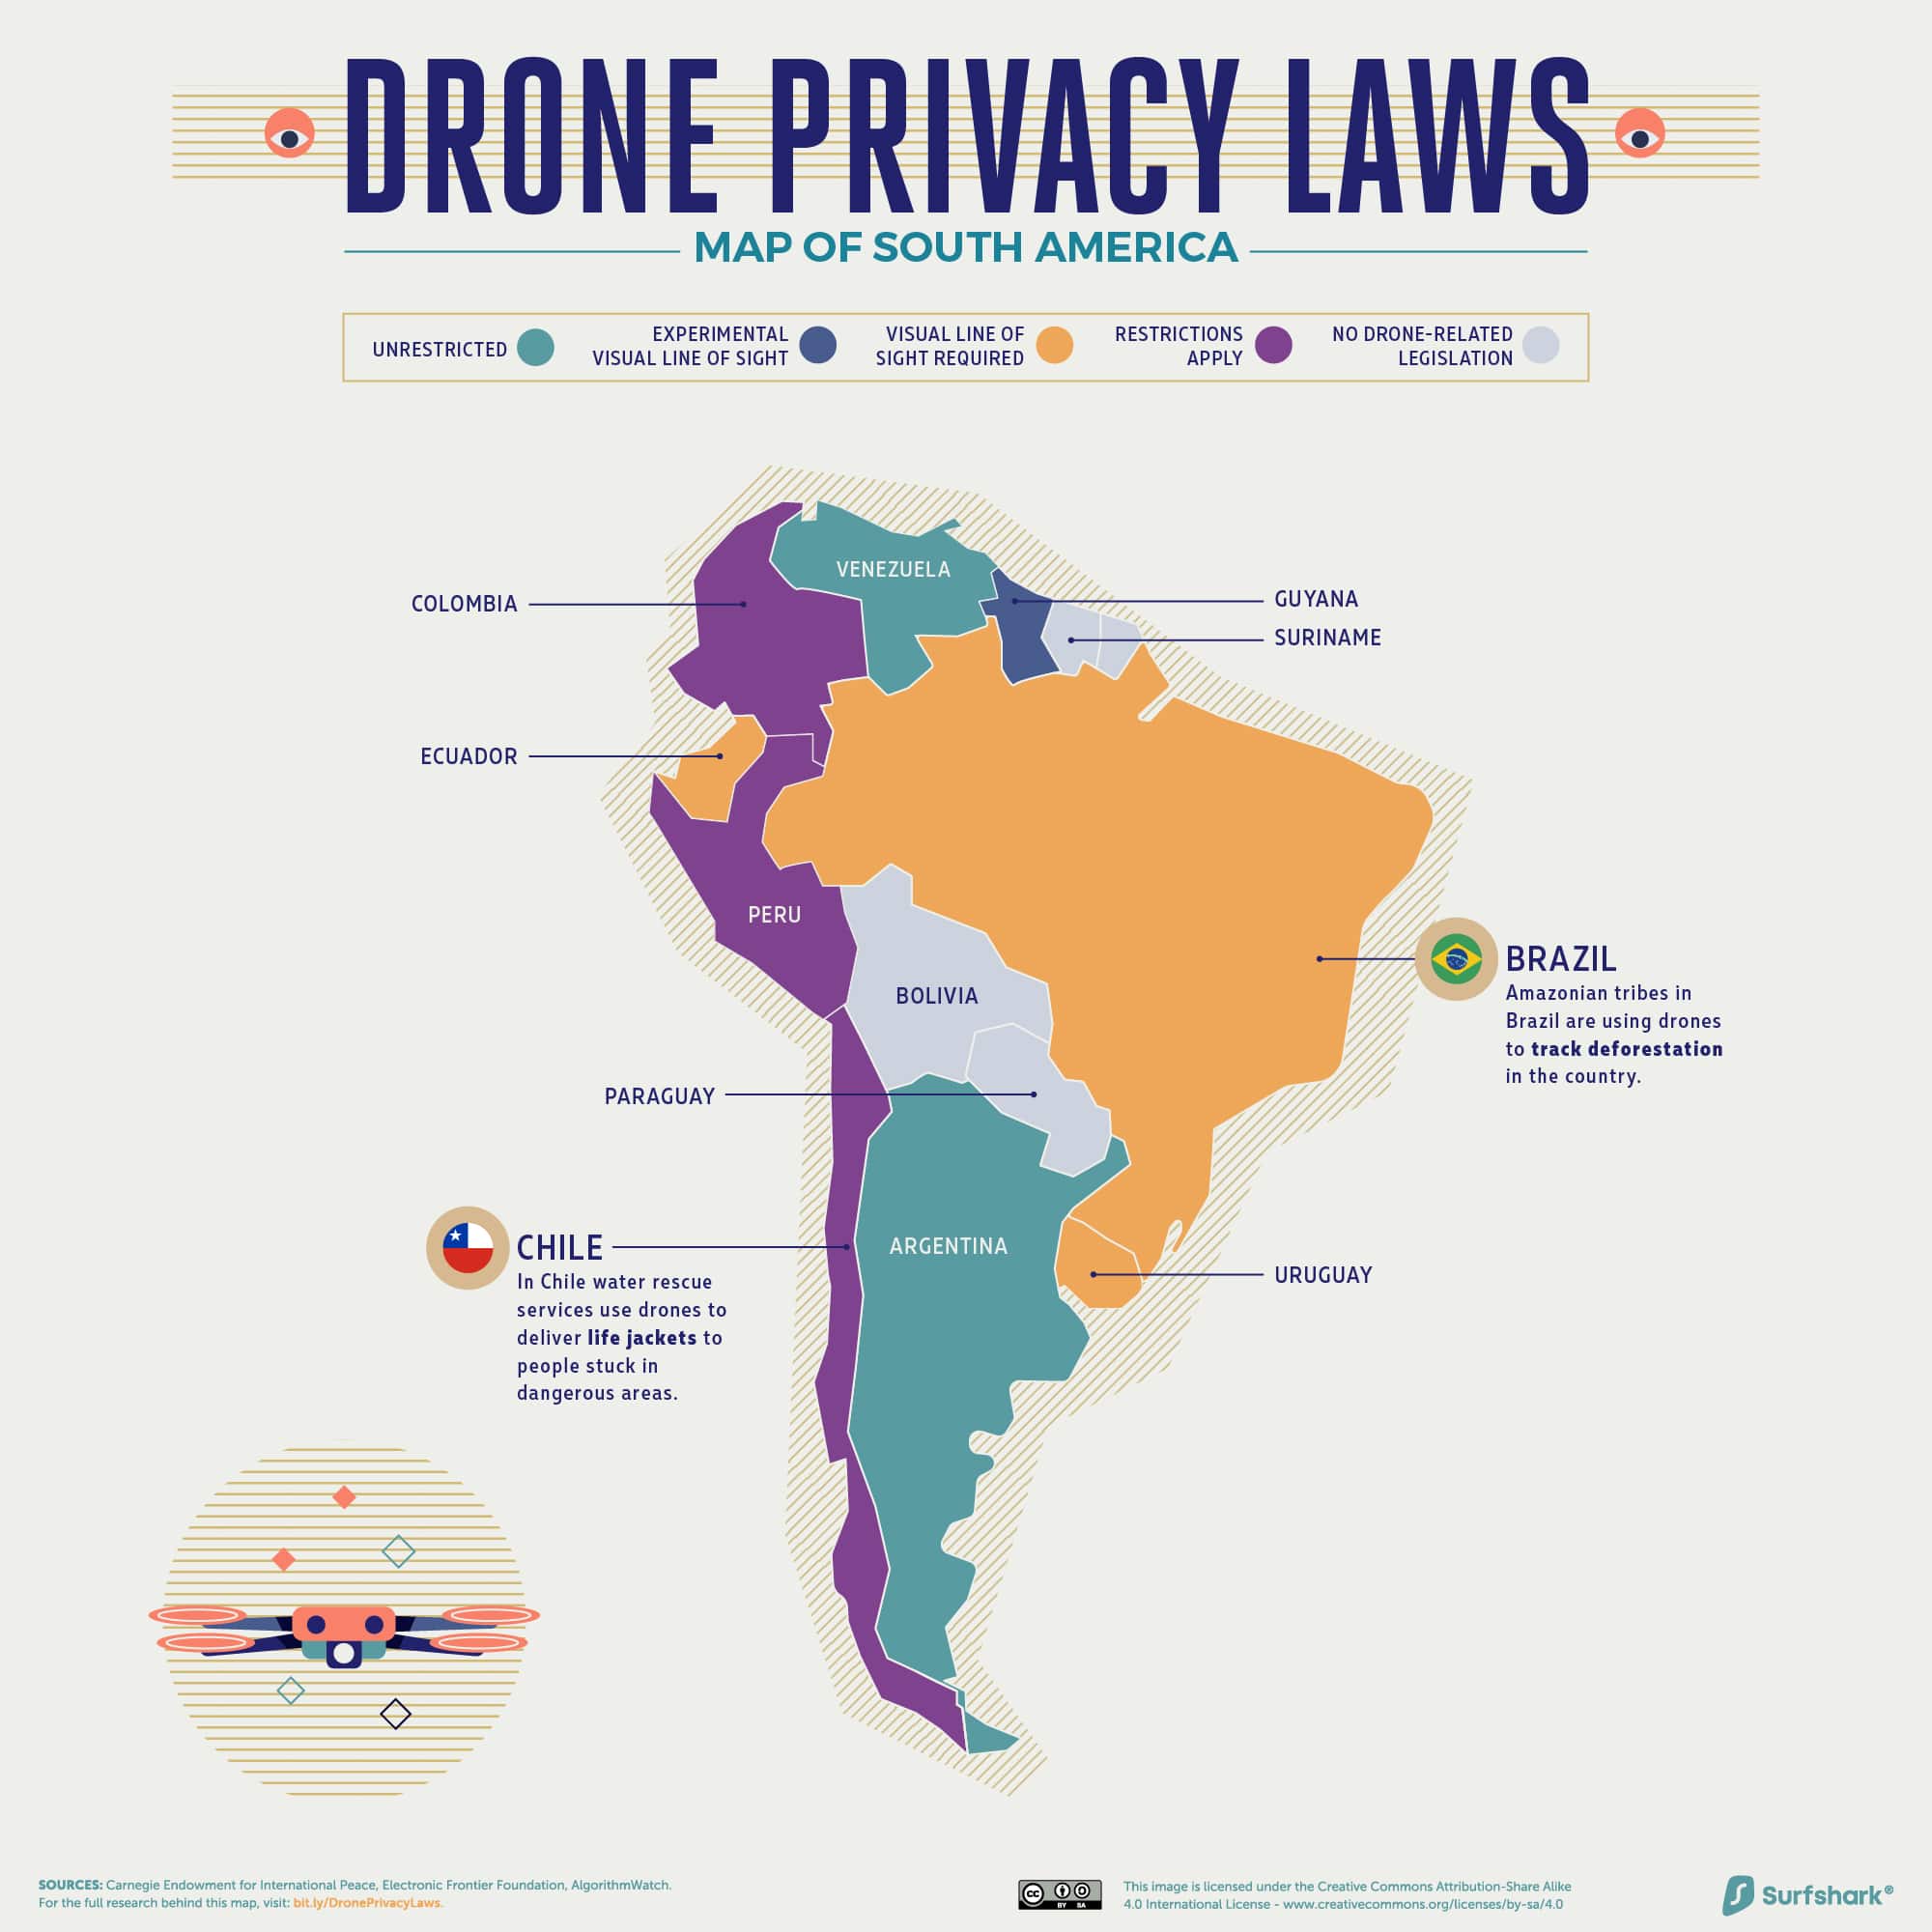 a map of South America with drone privacy laws for each country coded in color